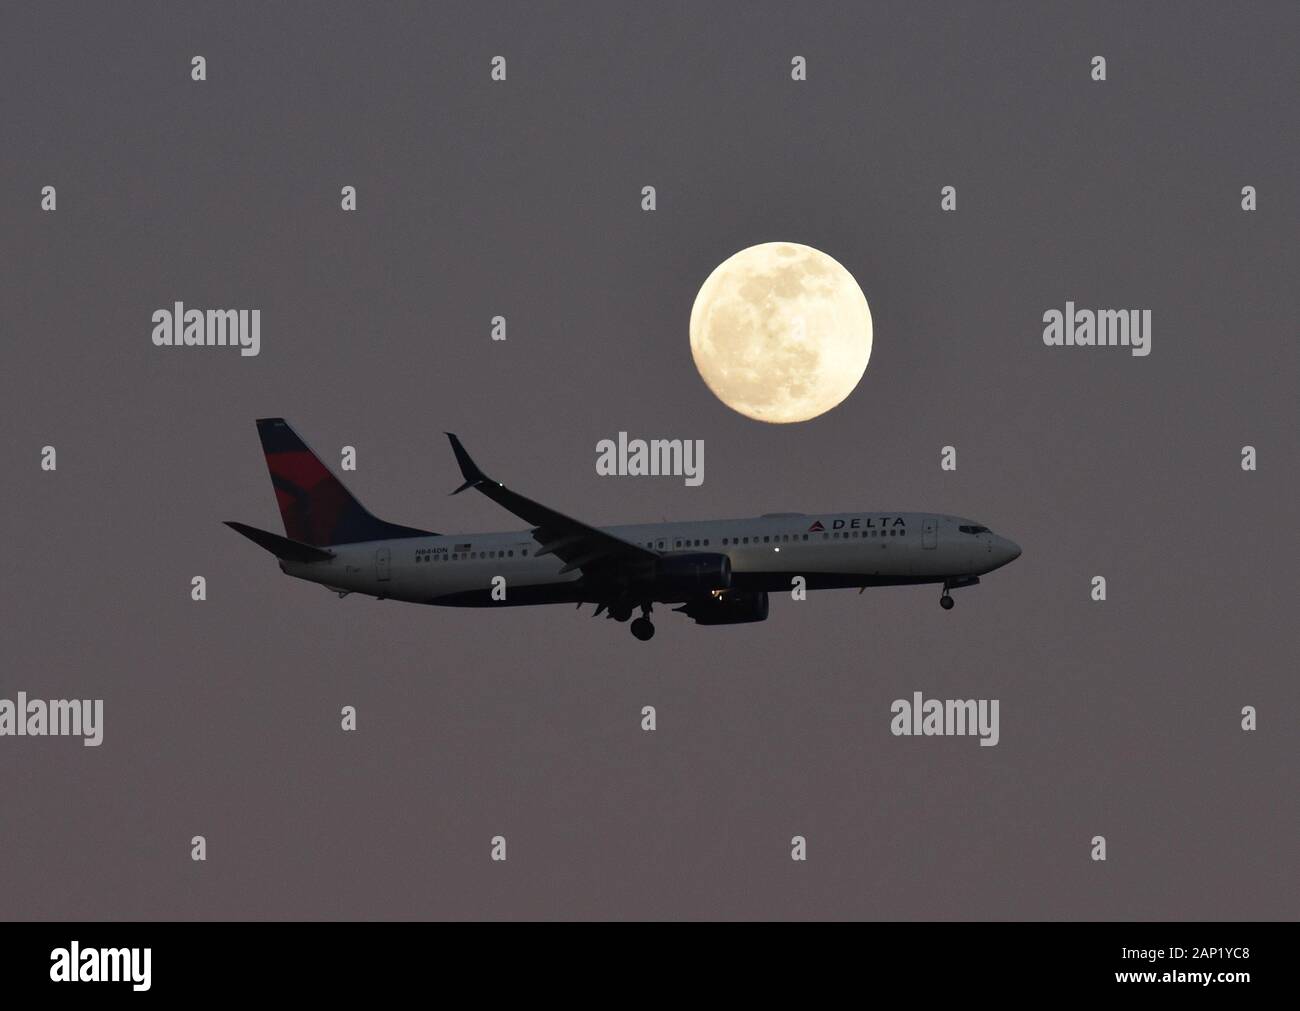 A Delta Airlines Boeing 737-900ER airplane lands underneath a full moon near Orlando International Airport or MCO. Stock Photo